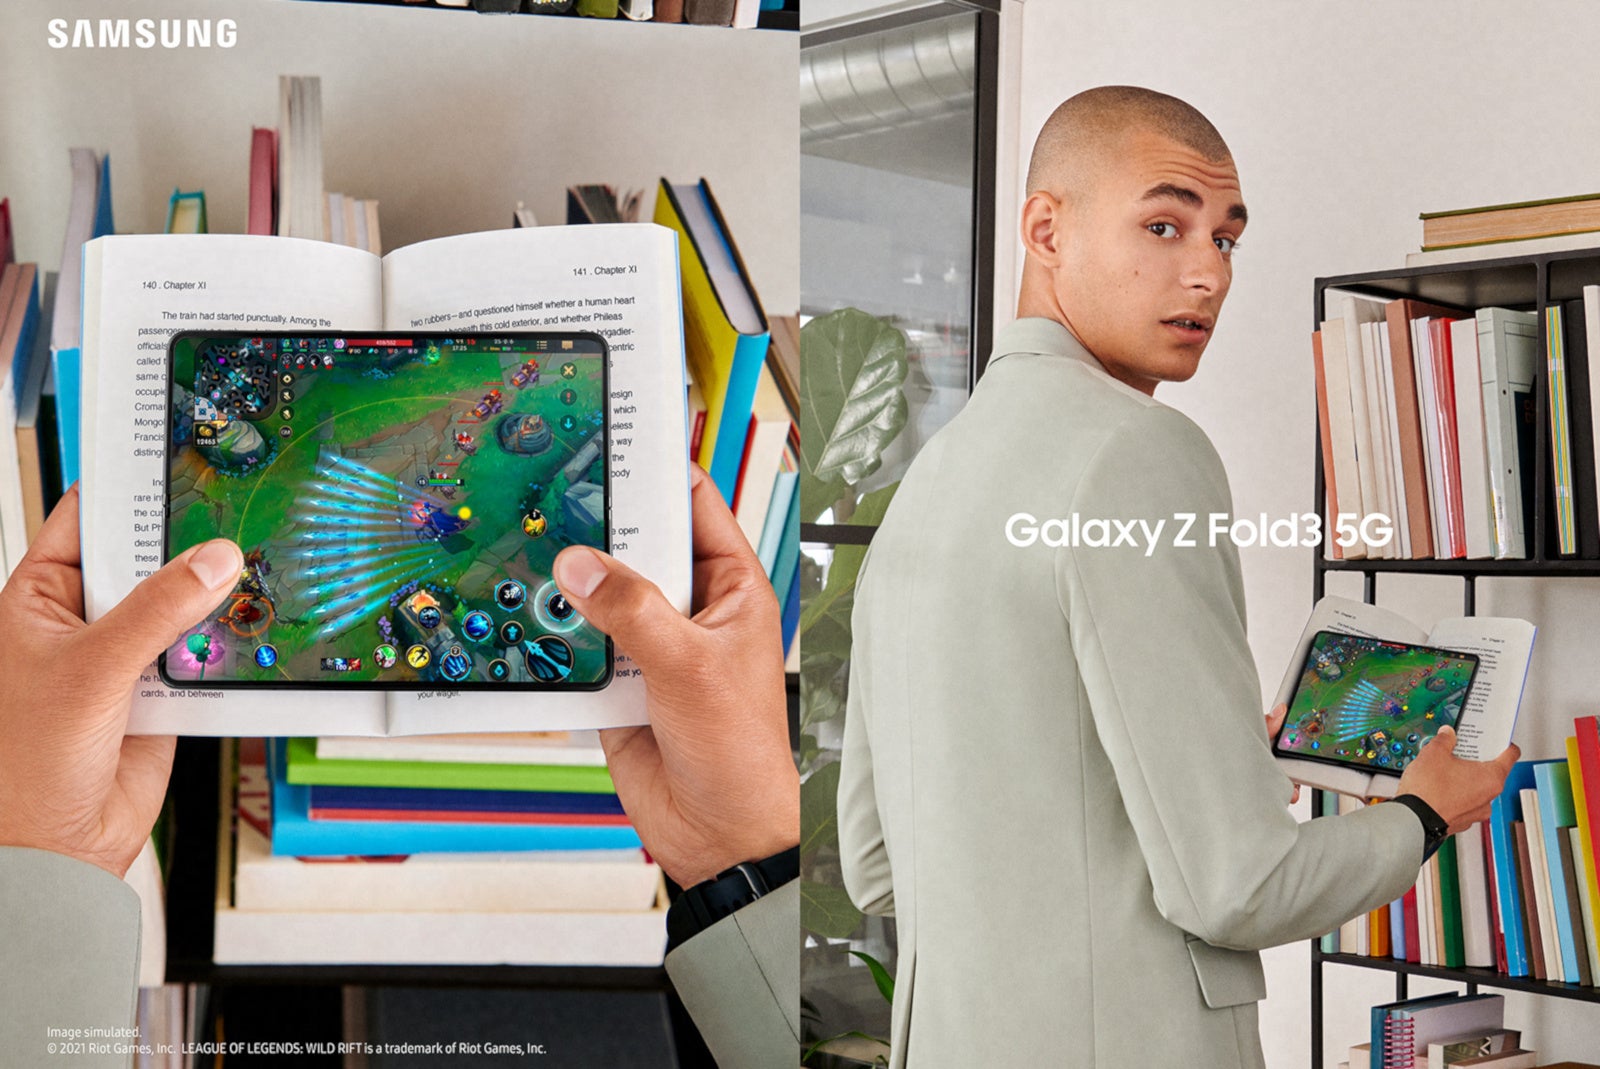 Samsung Galaxy Z Fold 3 5G is official: new specs, water resistance, S Pen